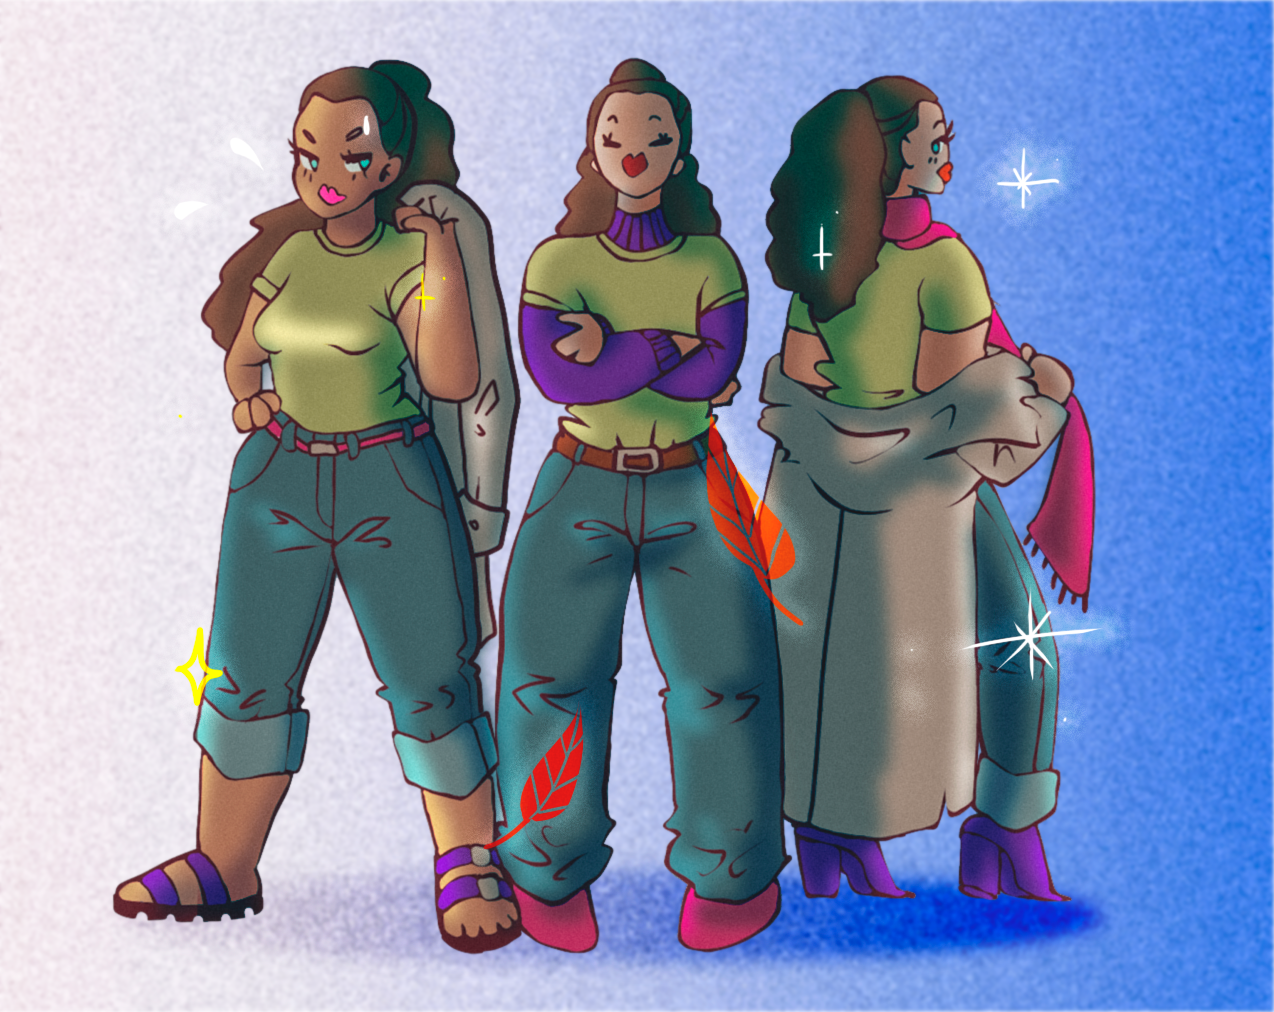 Illustration representing a capsule wardrobe, with 3 figures wearing various combinations of the same garments.